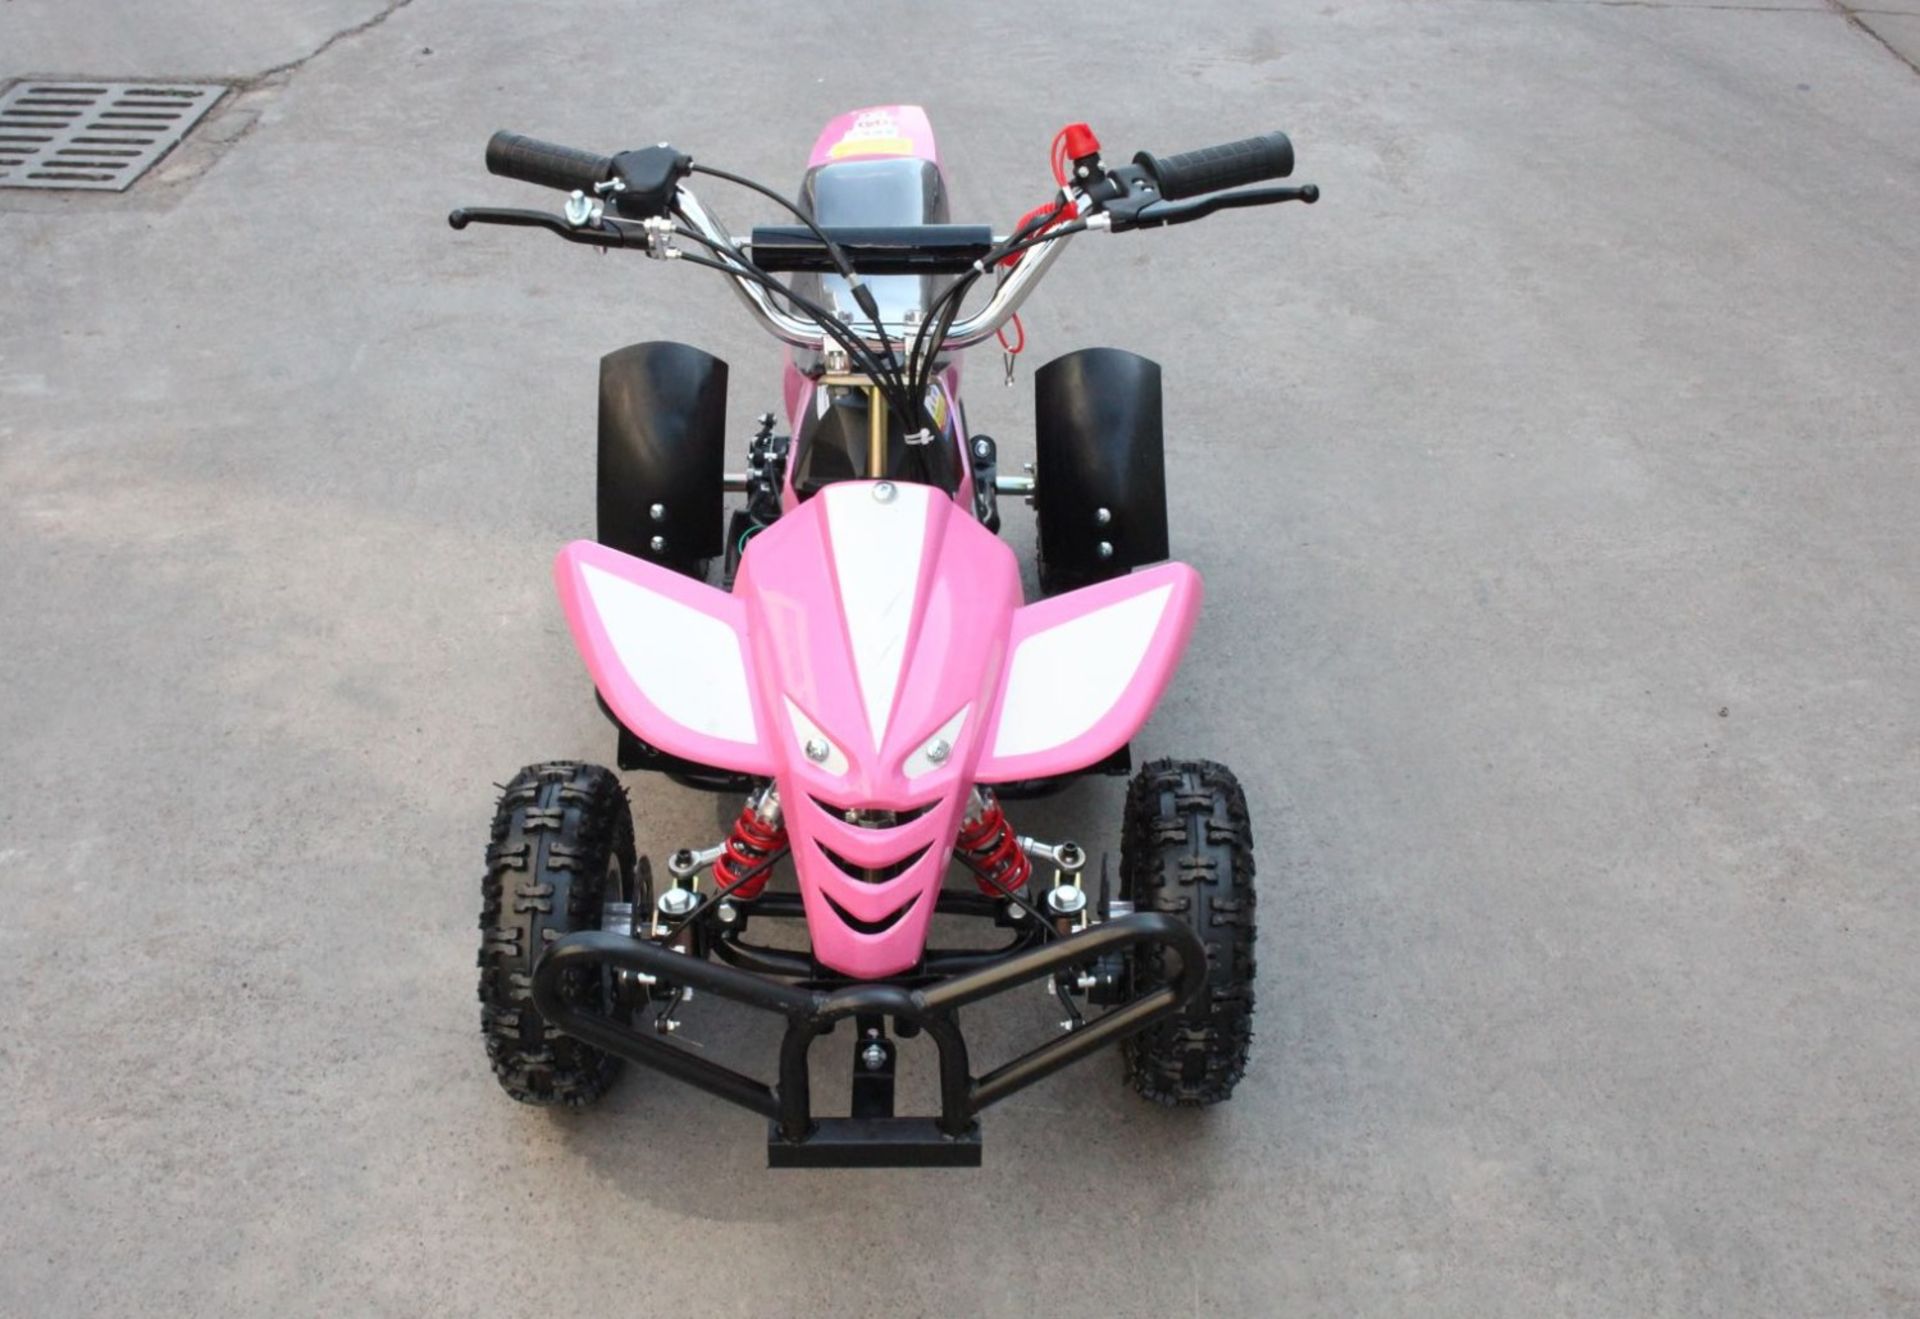 + VAT Brand New 50cc Mini Quad Bike FRM - Colours May Vary - Picture May Vary From Actual Item - Image 4 of 9